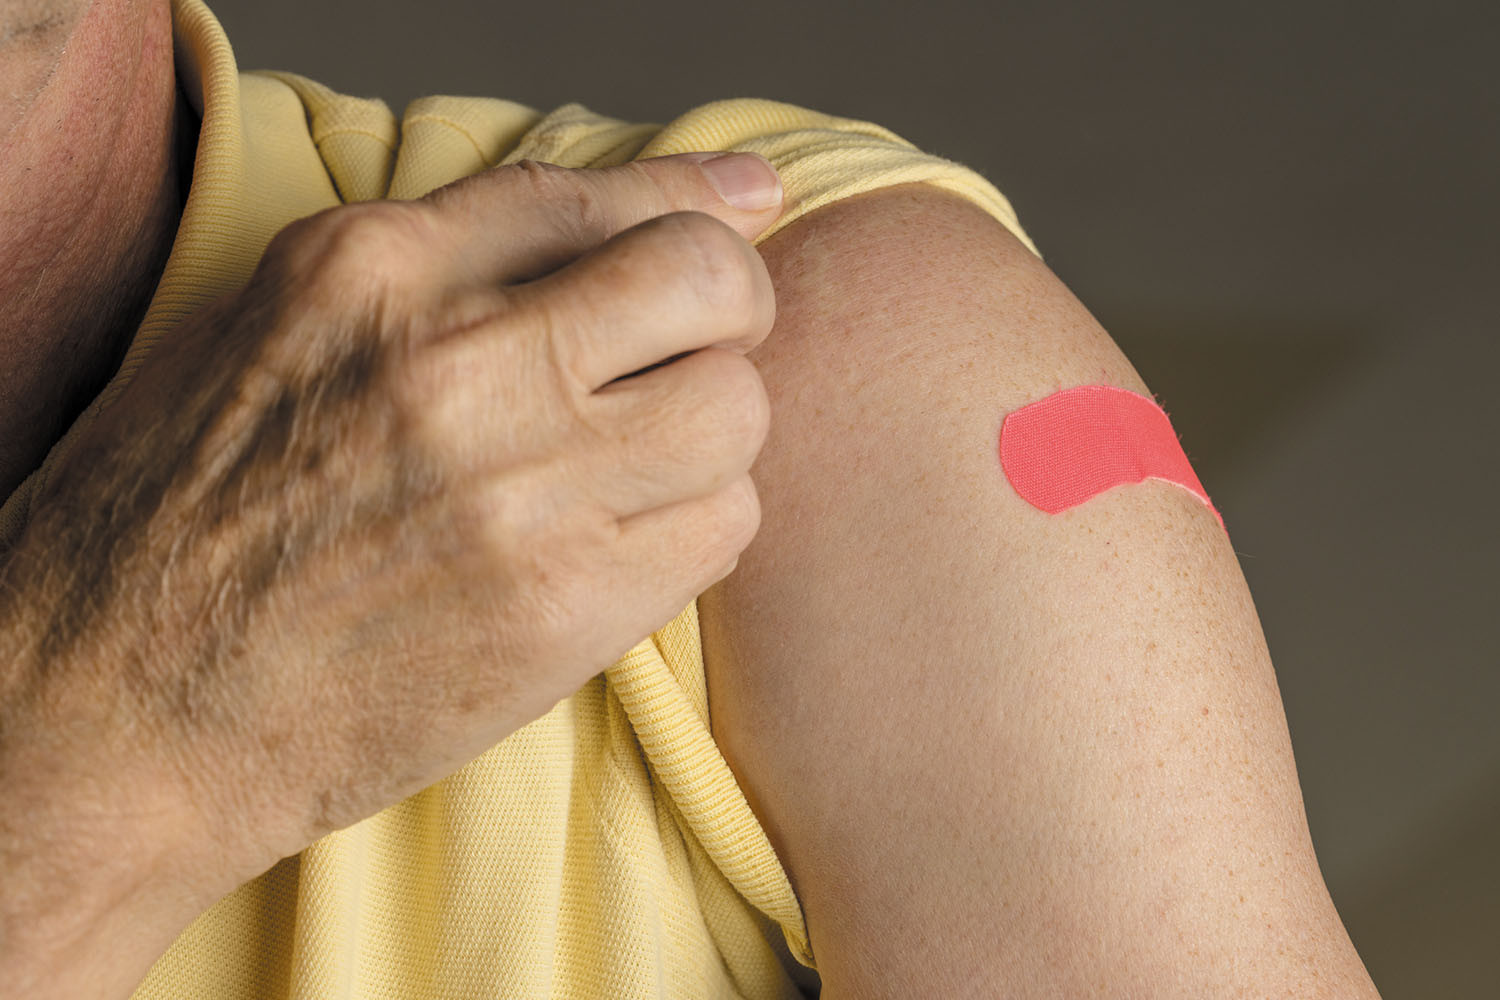 close-up photo of the upper arm of a person who has just received a vaccination and has a red bandage on the spot